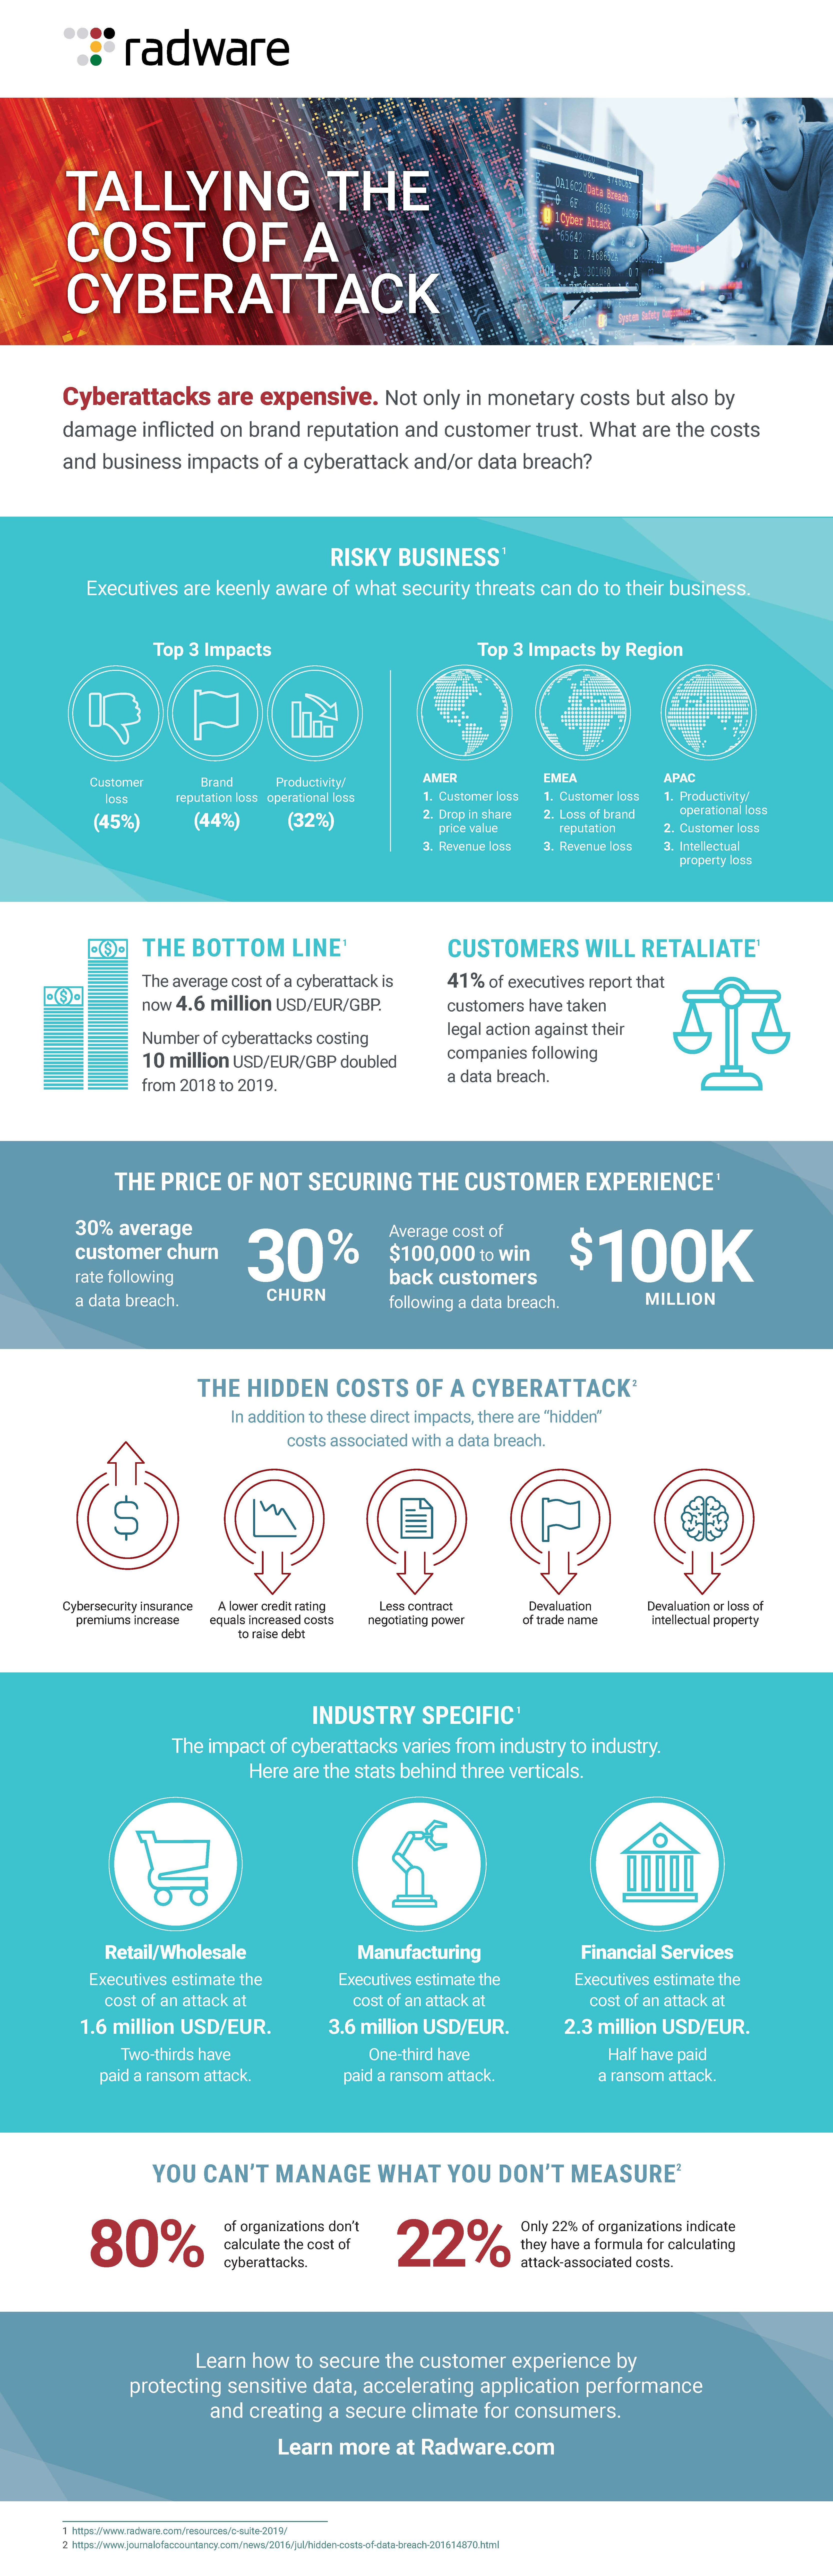 Tallying the Cost of a Cyberattack Infographic